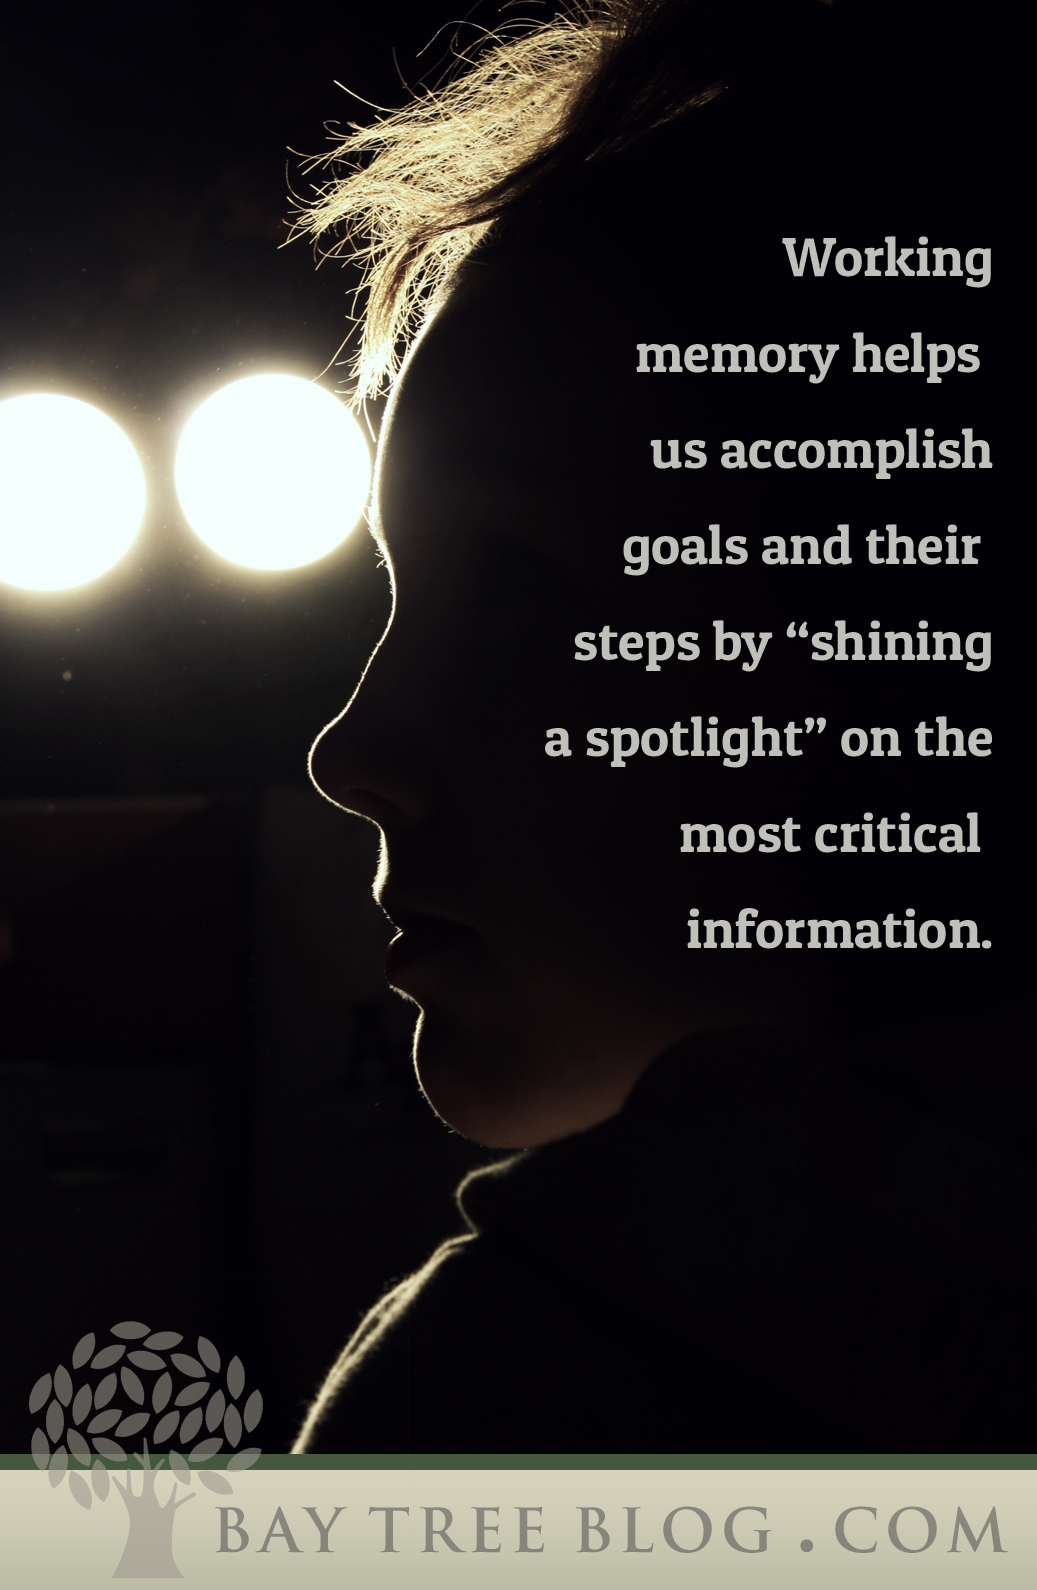 Working memory helps us accomplish goals and their steps by "shining a spotlight" on the most critical information. (BayTreeBlog.com)